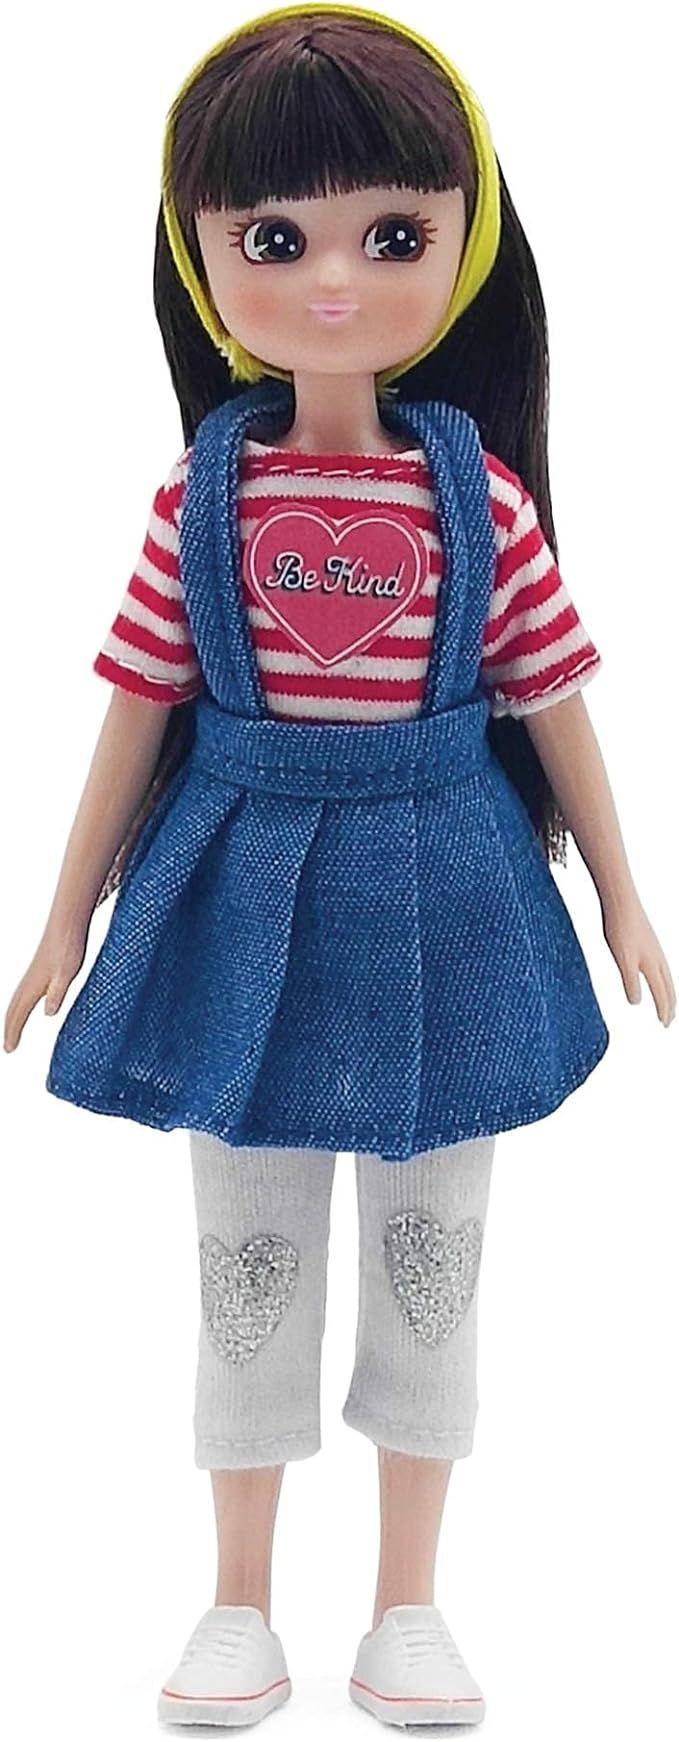 Lottie Be Kind Doll | Dolls for Girls & Boys Age 5 6 7 and Up | Amazon (US)